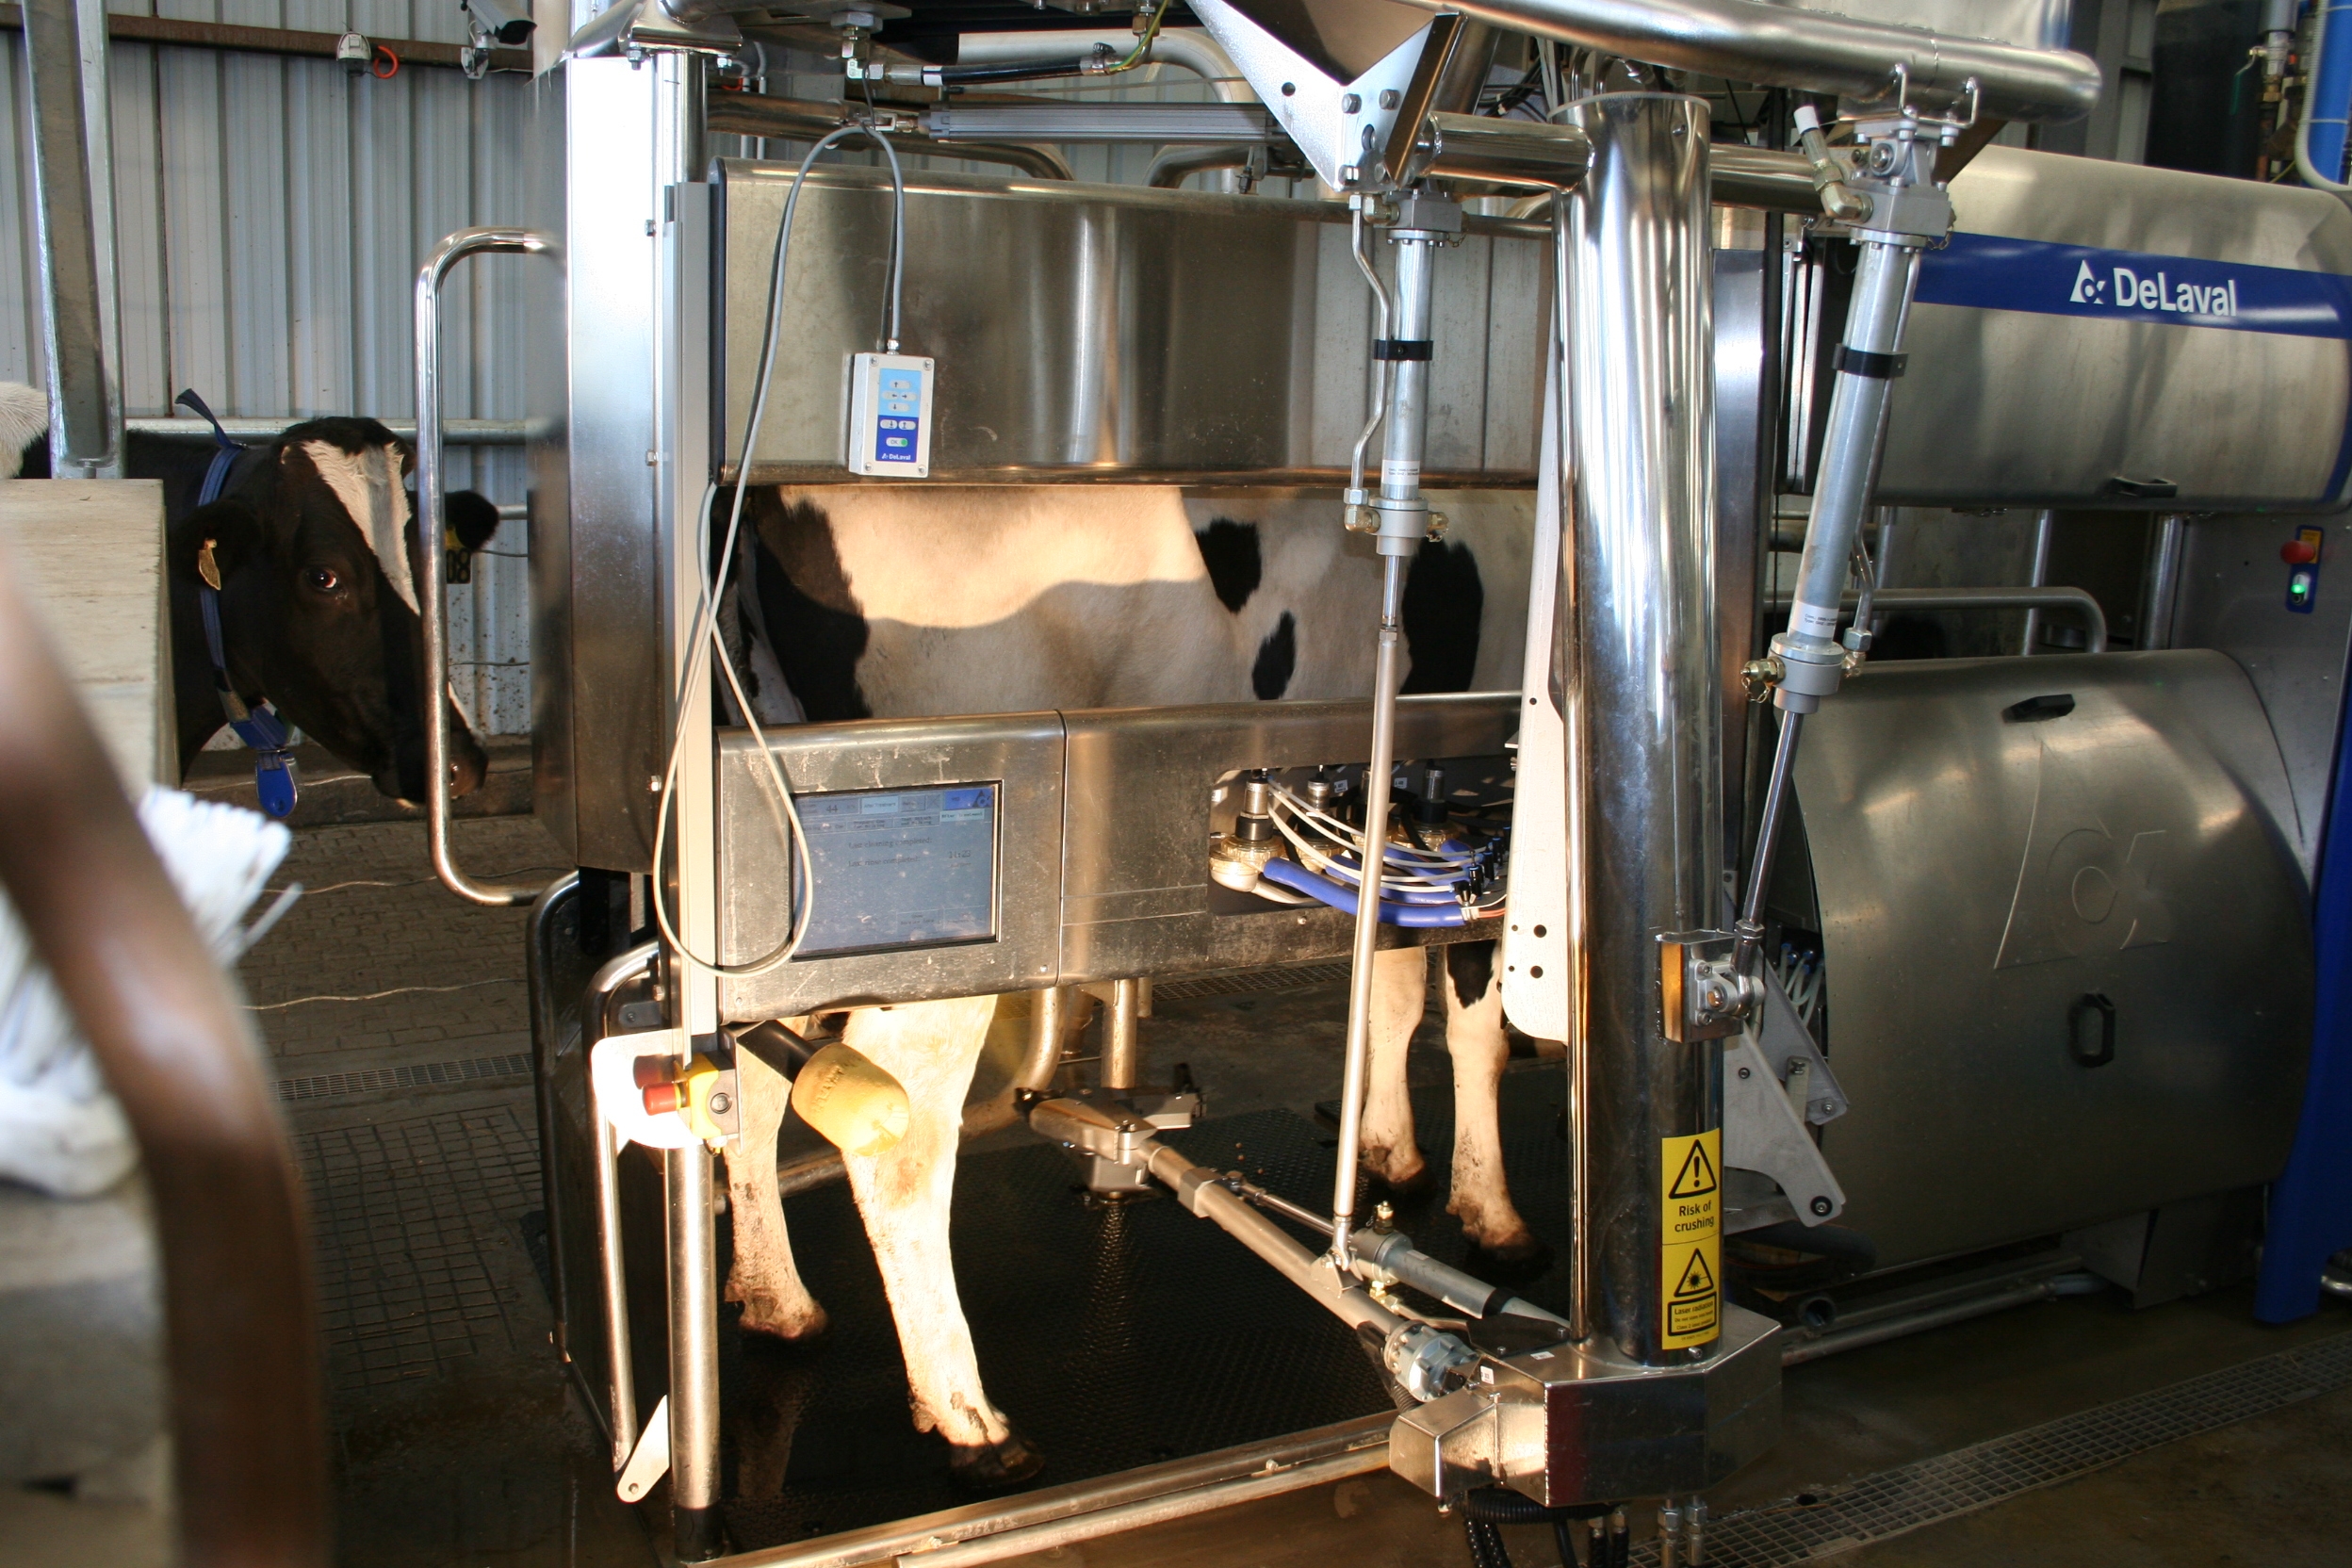 Cows being milked in a robotic dairy